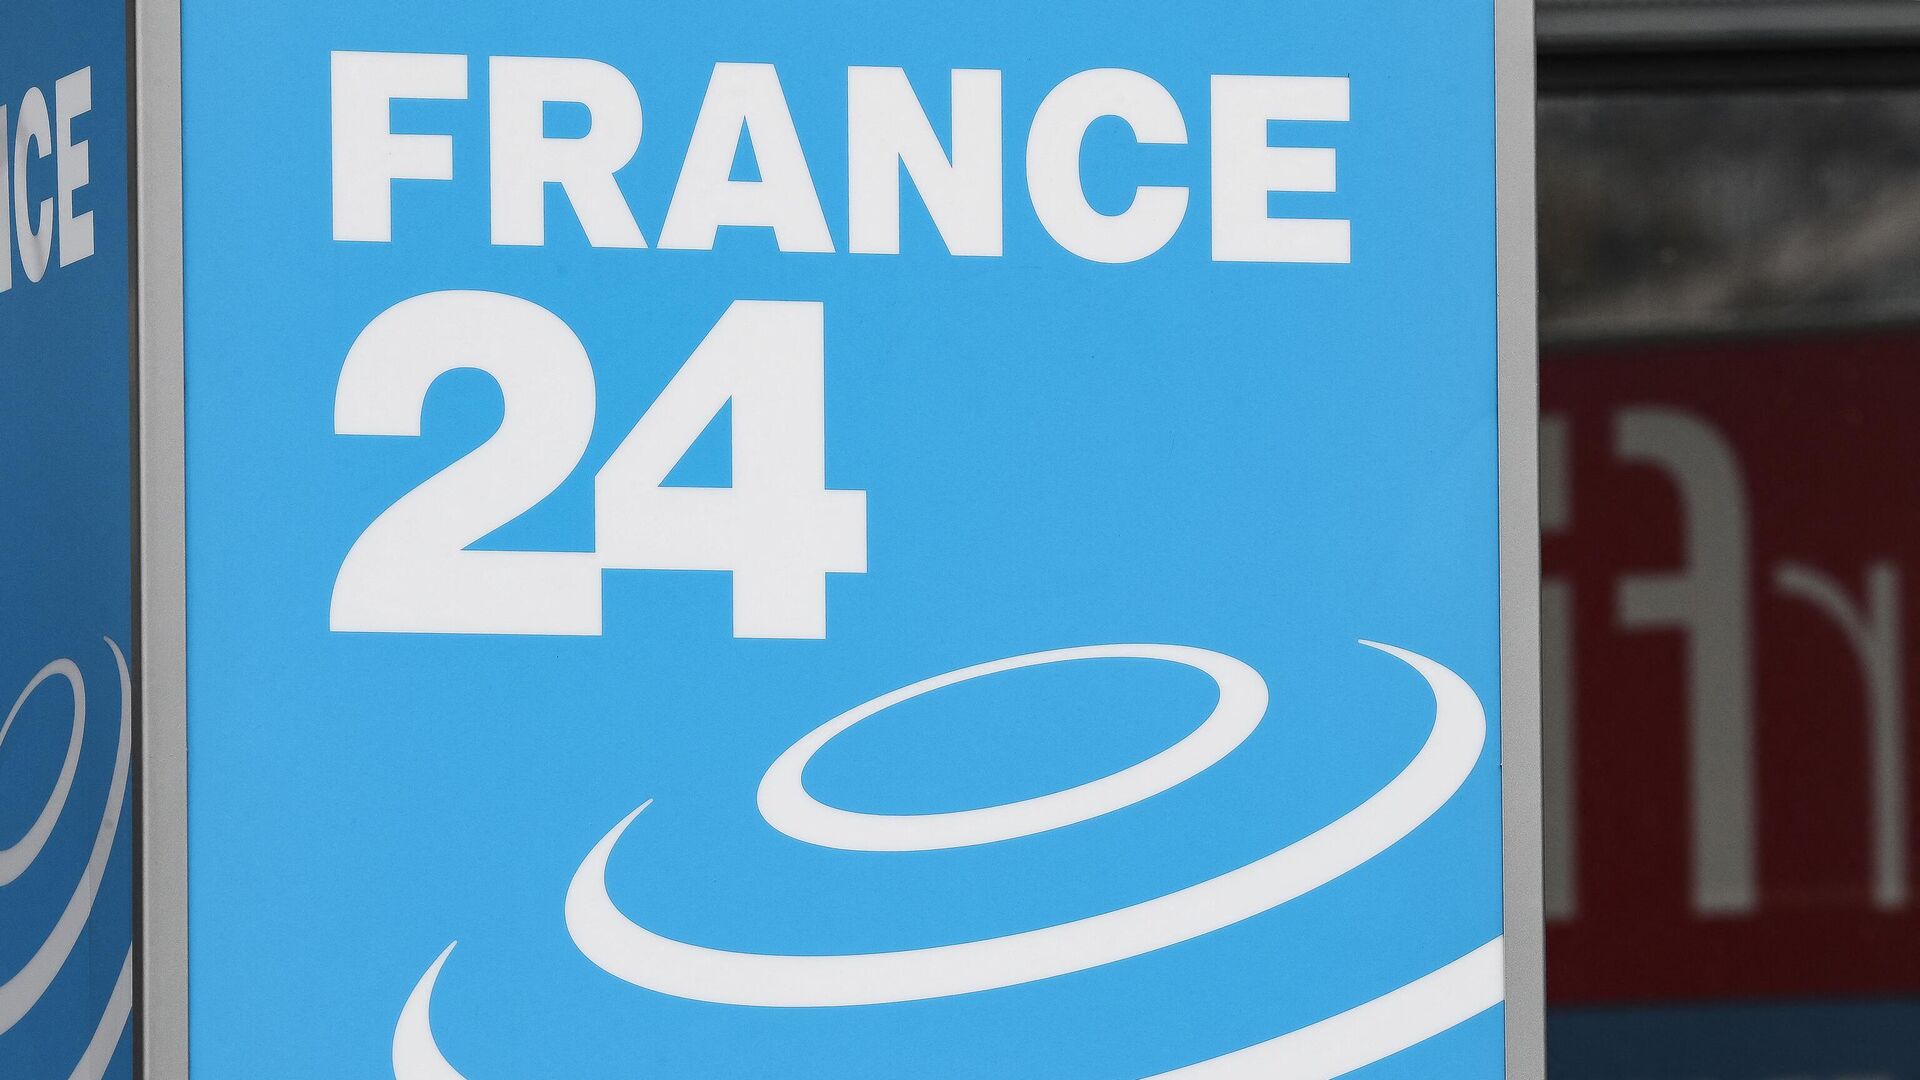 In this file photo taken on April 9, 2019 shows the logo of the live news channel France 24 at Issy-les-Moulineaux, near Paris. - Sputnik International, 1920, 27.03.2023